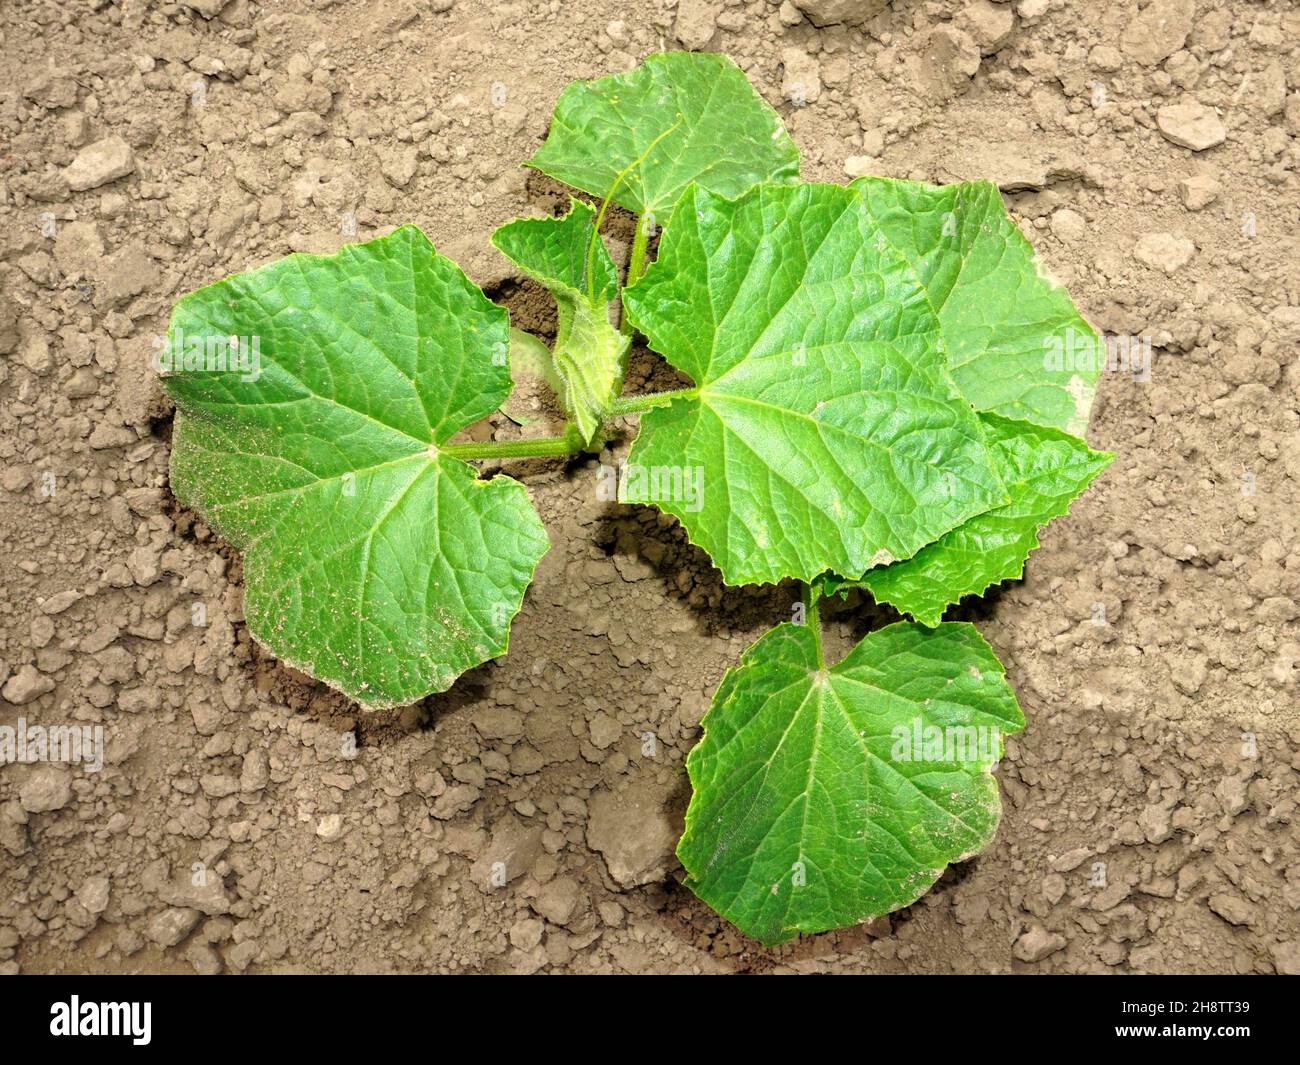 Young cucumber plant struggle to grow in dry soil, top view Stock Photo